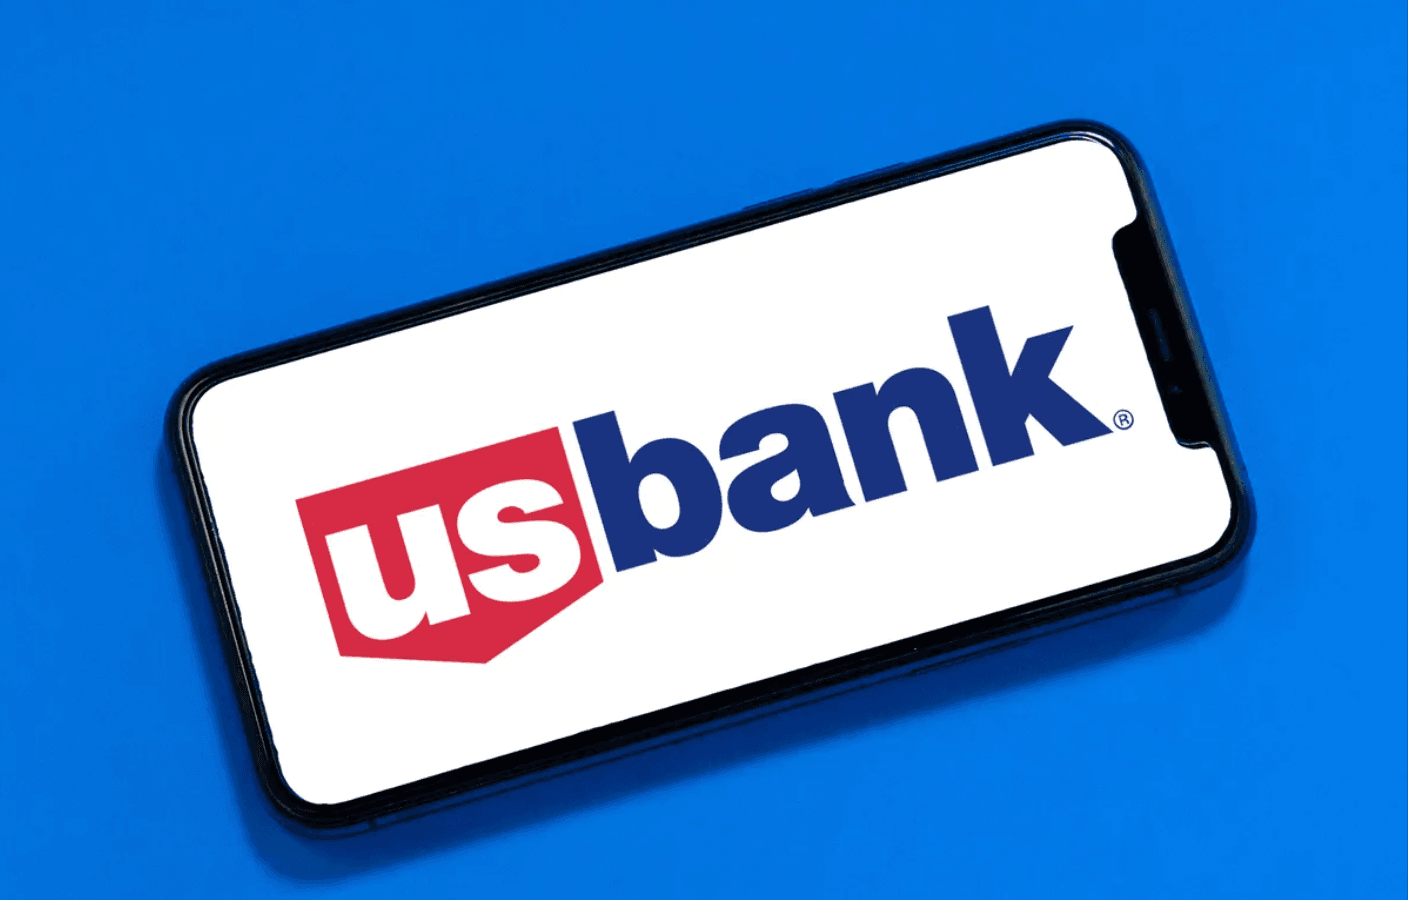 US Bank Mobile App to help cancel unwanted recurring bills